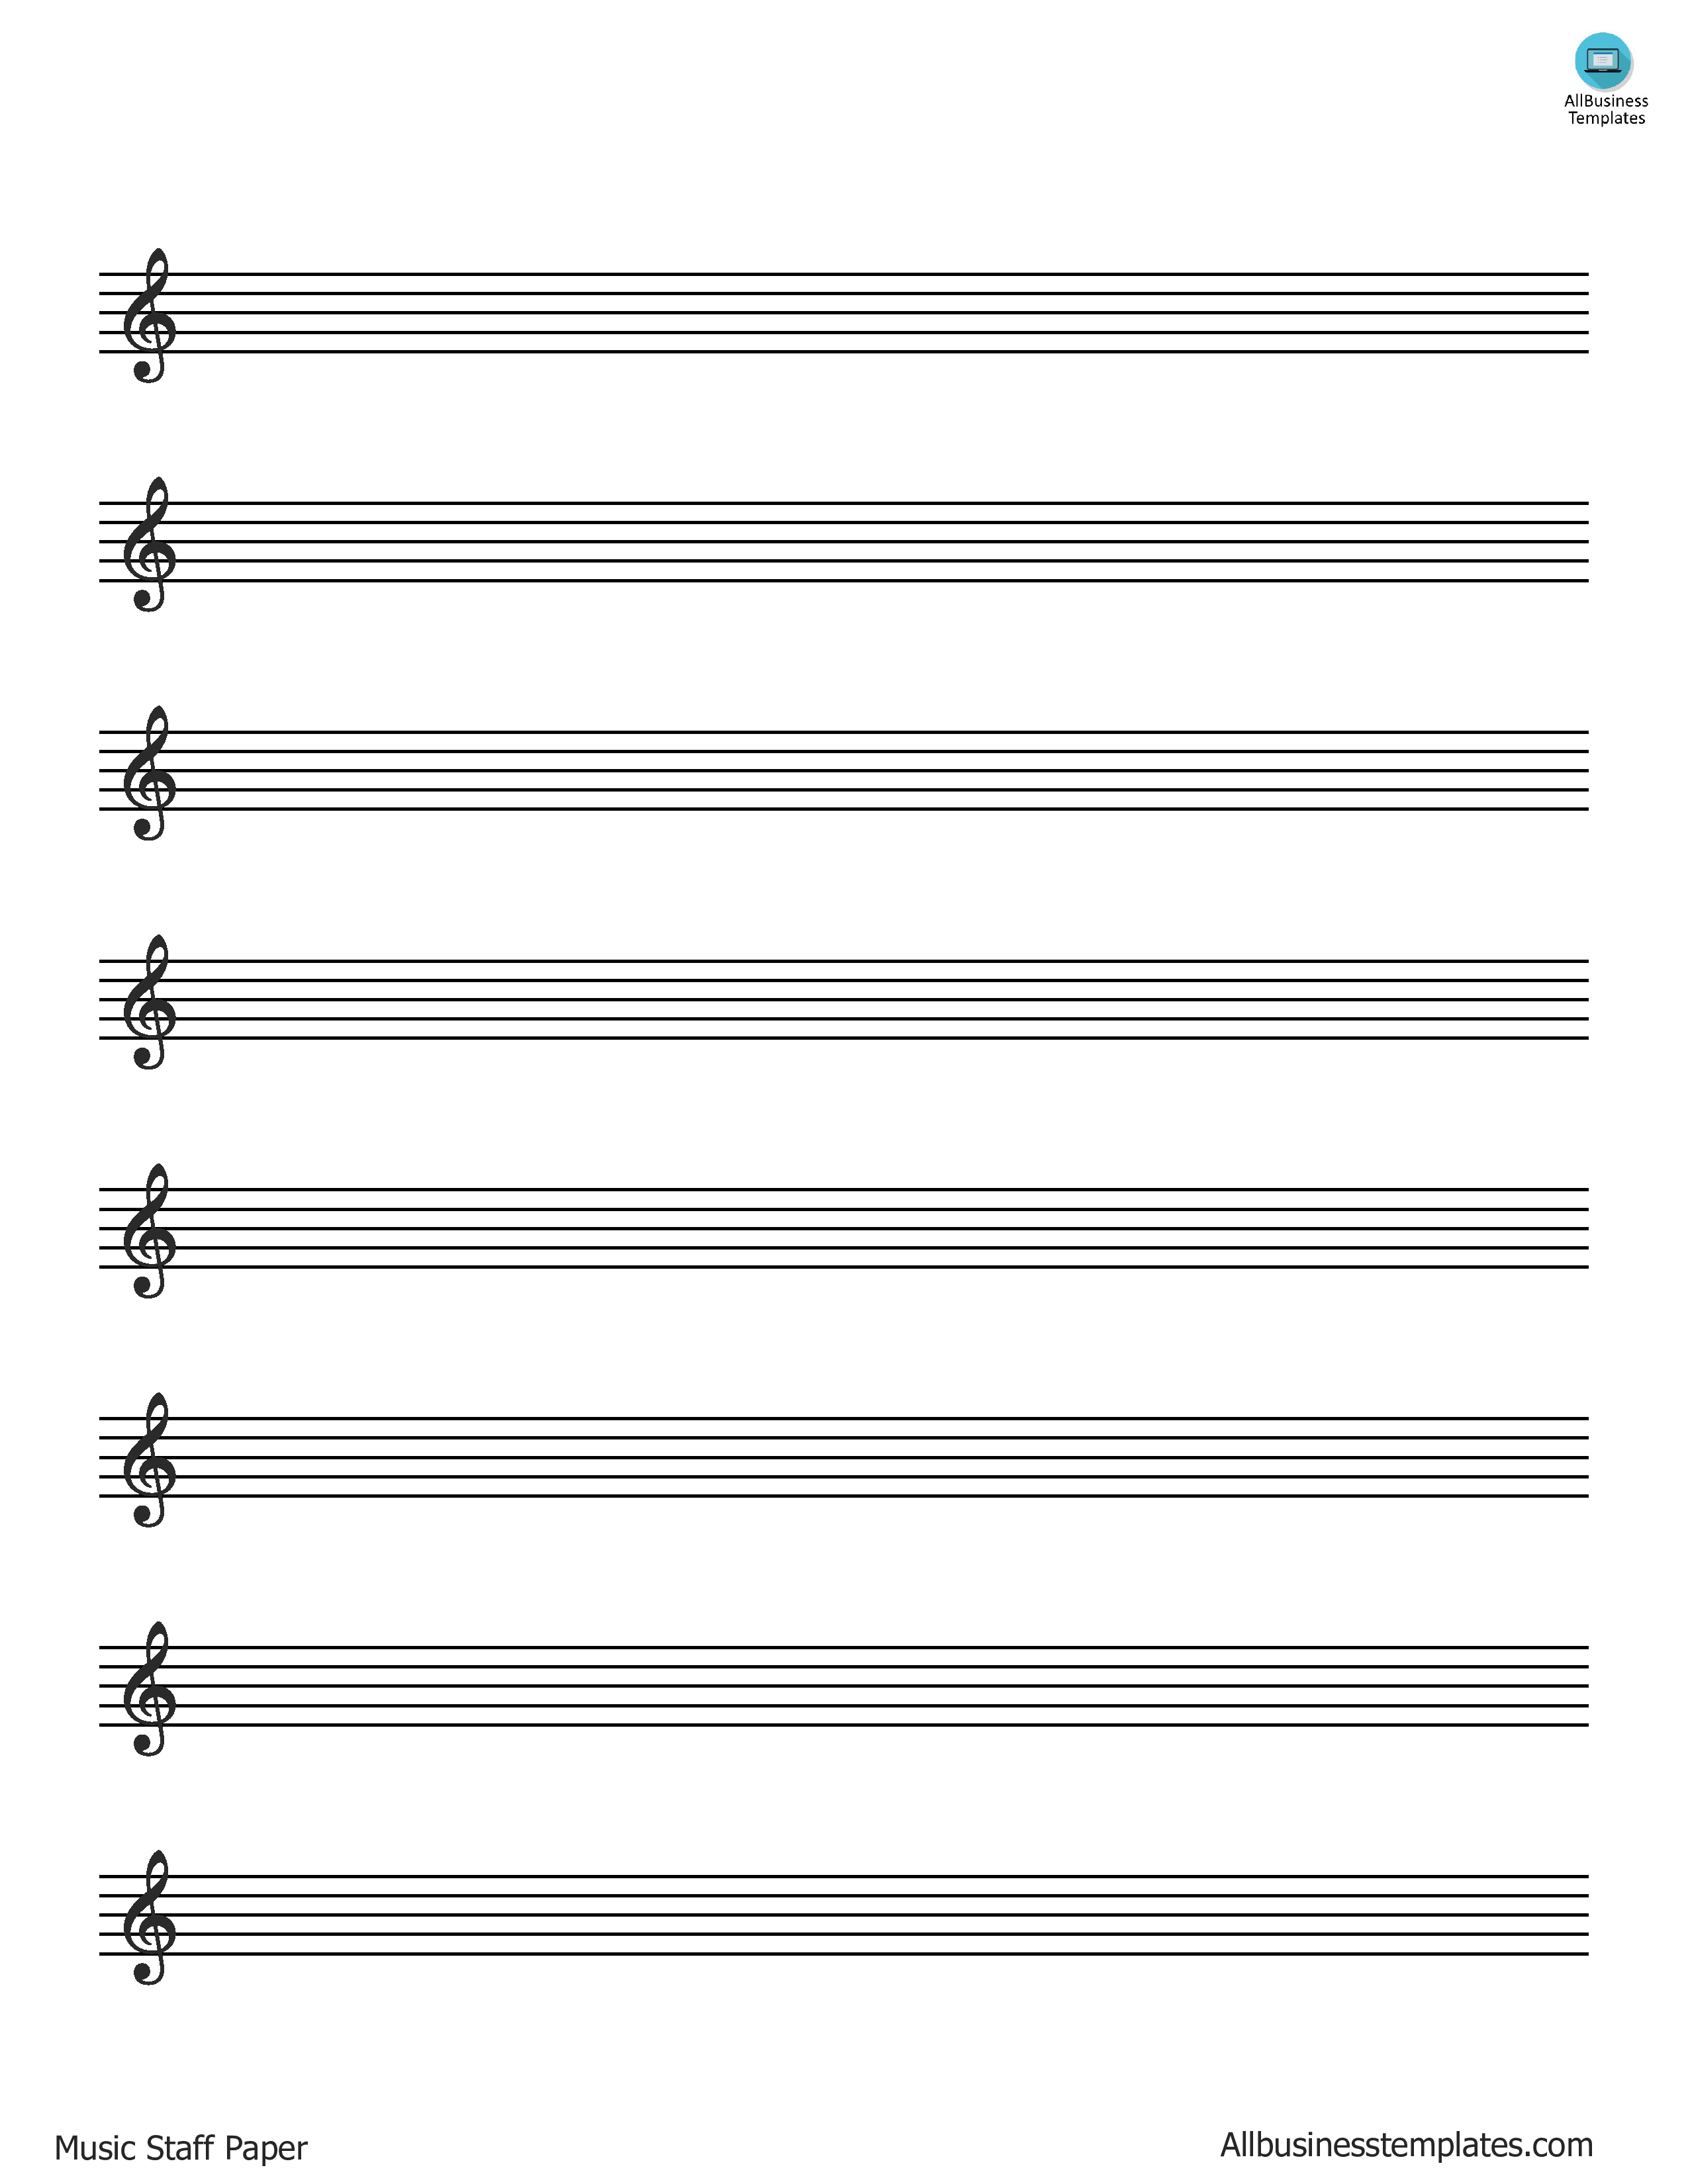 Free Printable Music Staff Paper Templates At 8128